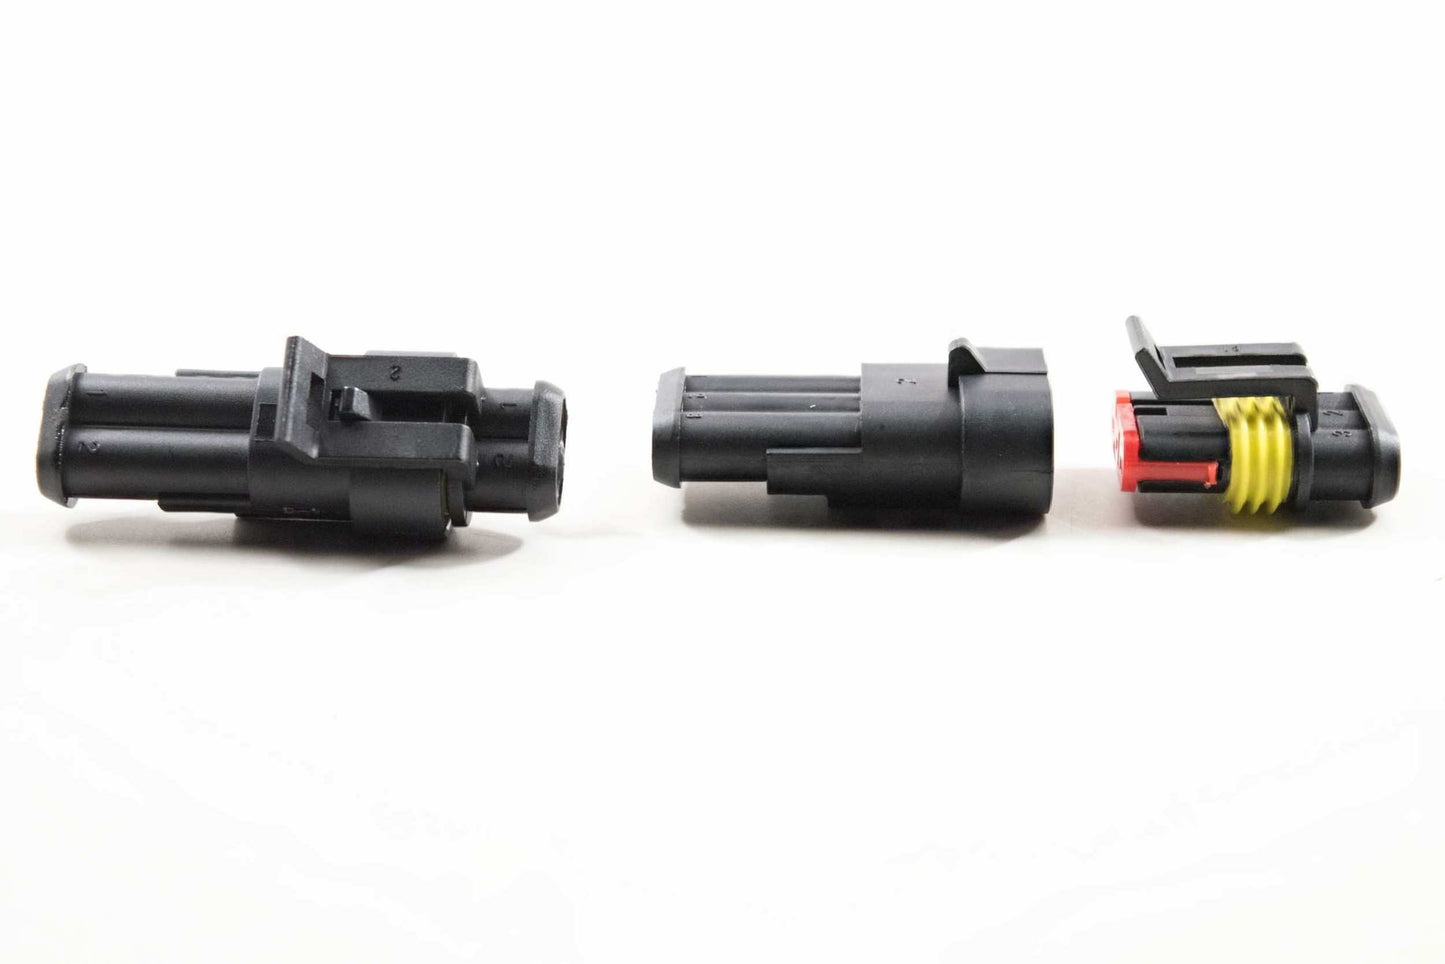 Connector: AMP Female - 4 pin